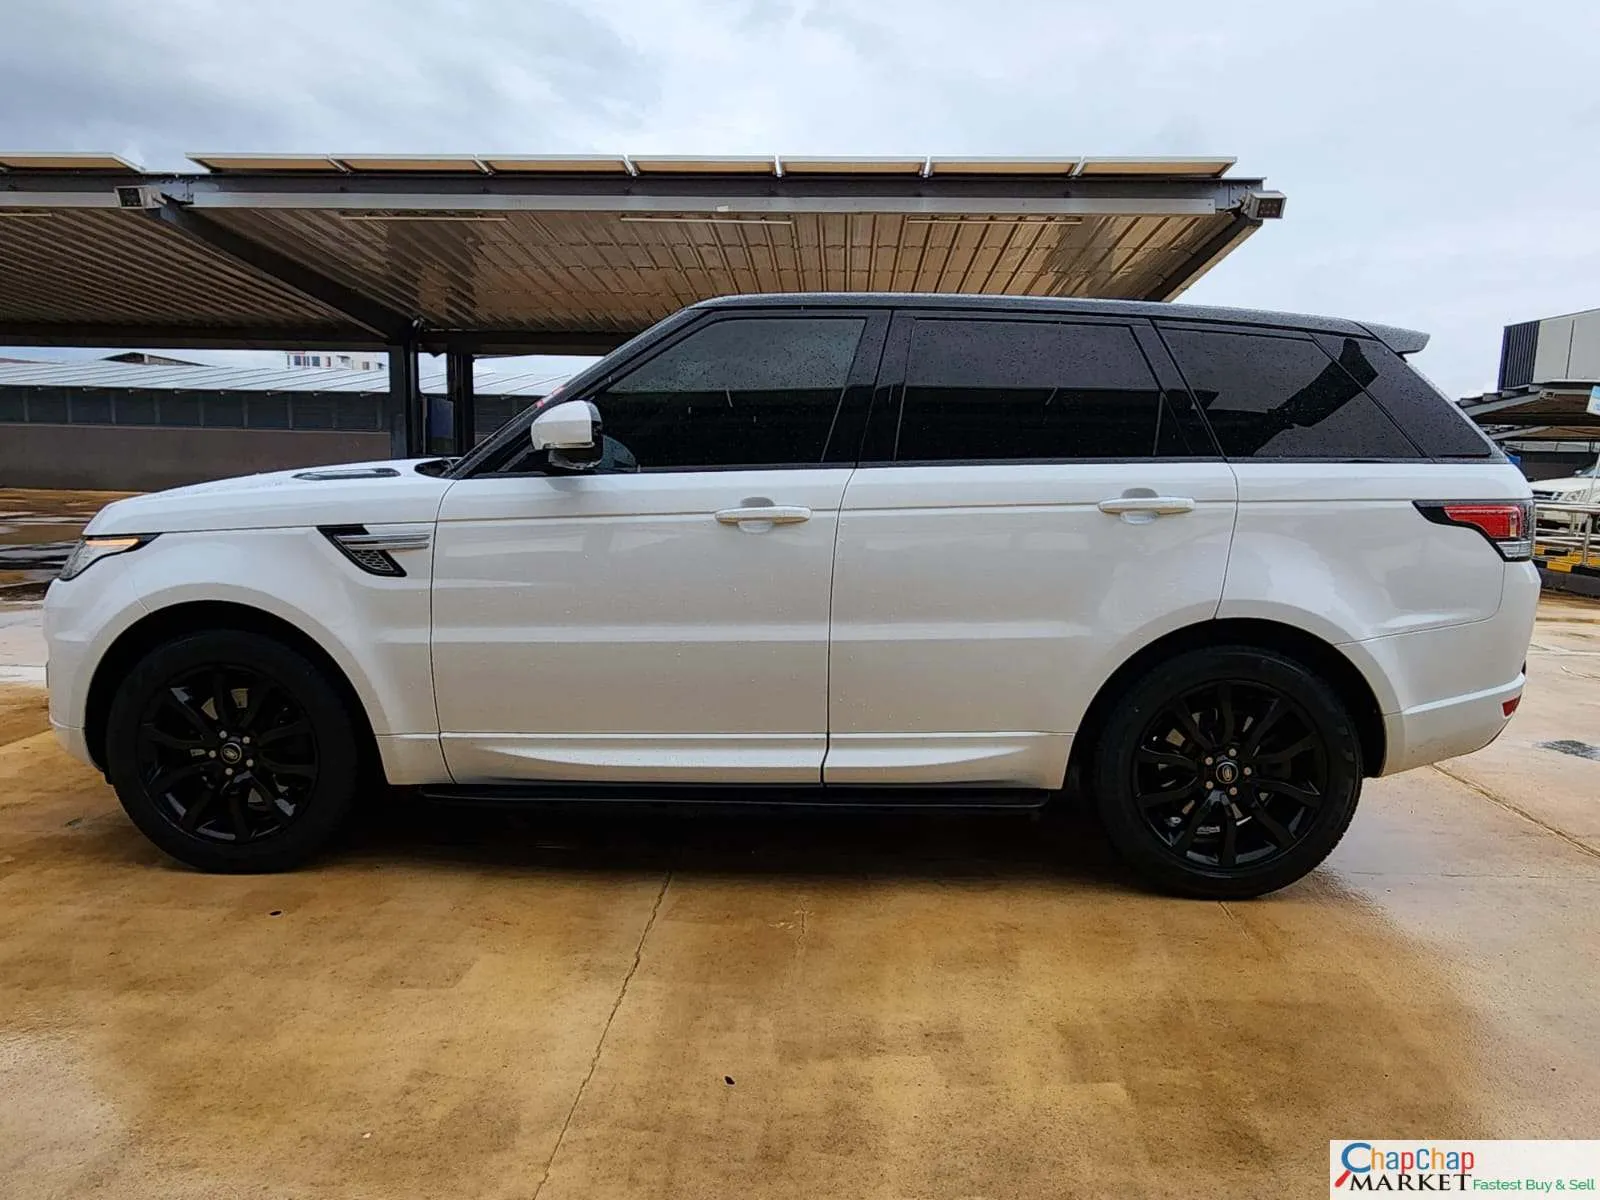 Cars Cars For Sale/Vehicles-Range Rover Sport Petrol QUICK SALE You pay 30% deposit Trade in OK EXCLUSIVE 9